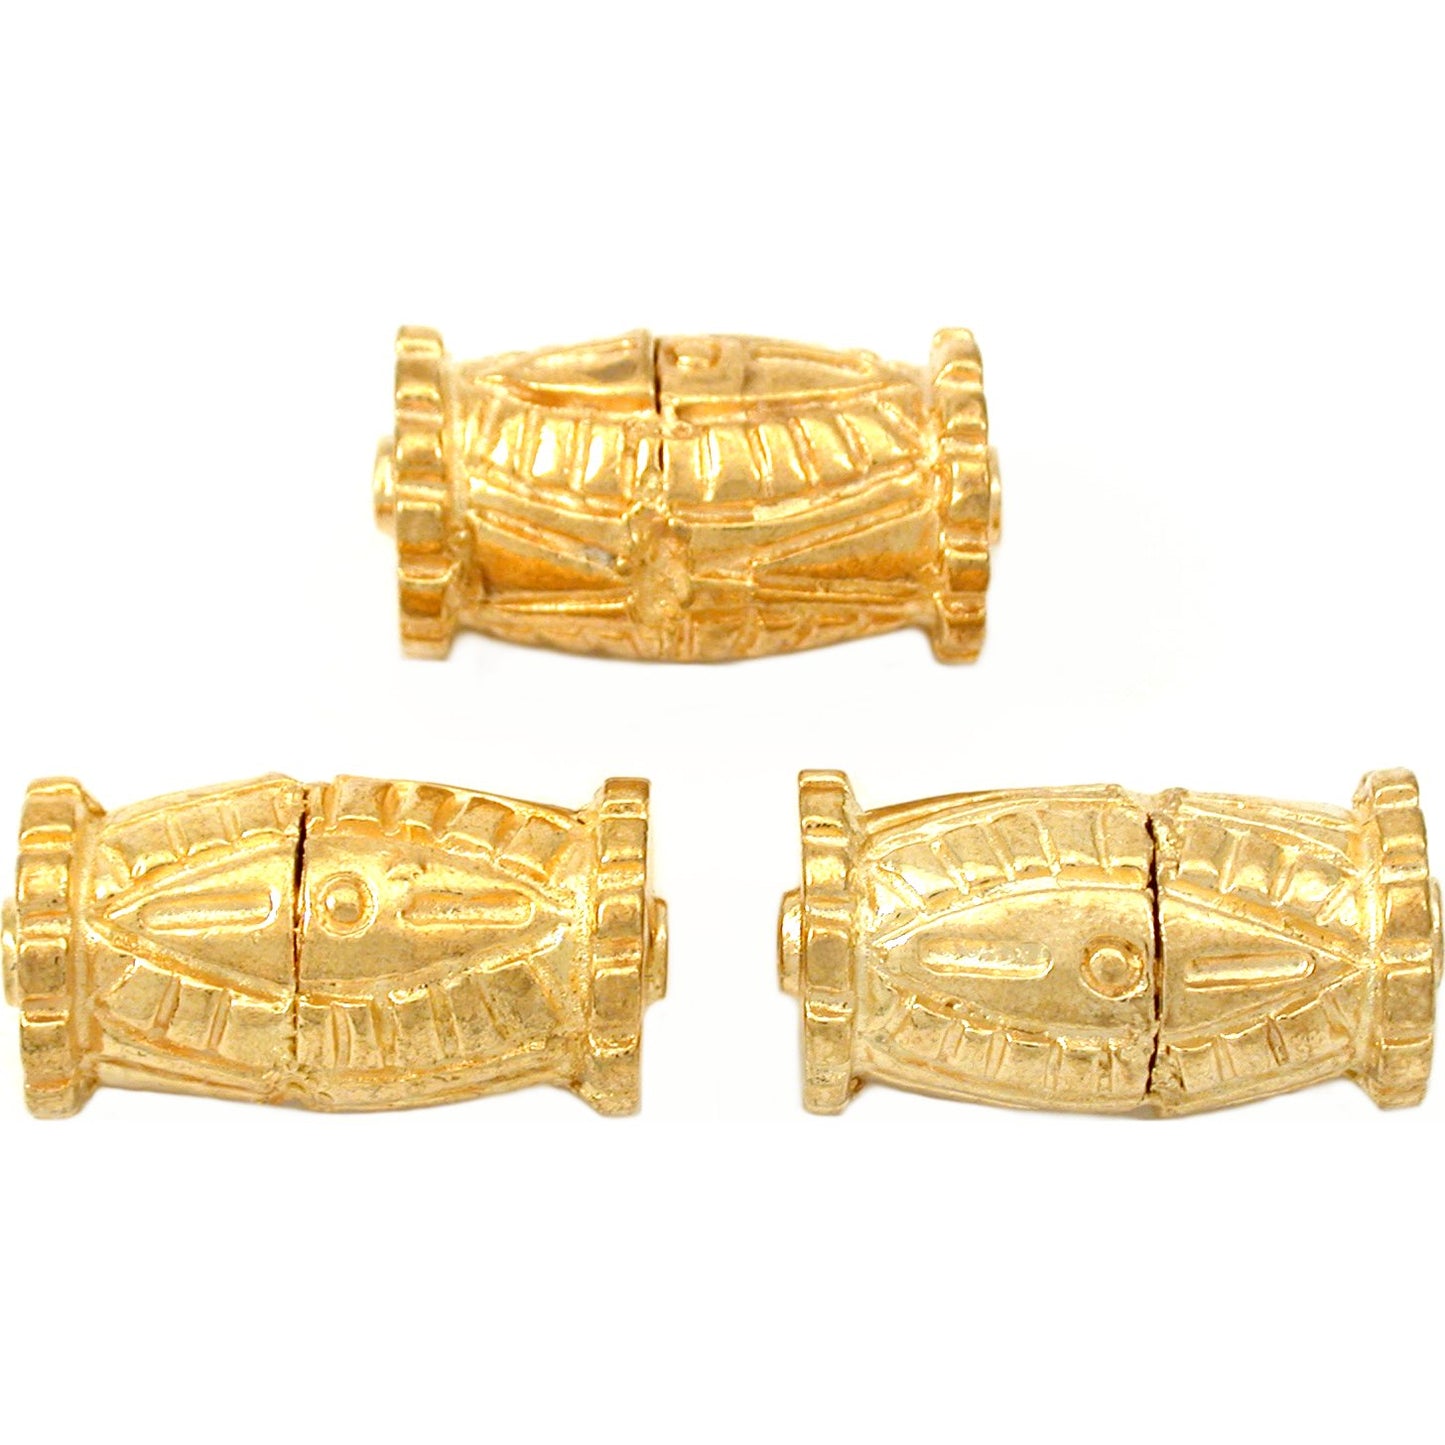 Bali Barrel Gold Plated Beads 21.5mm 19 Grams 3Pcs Approx.